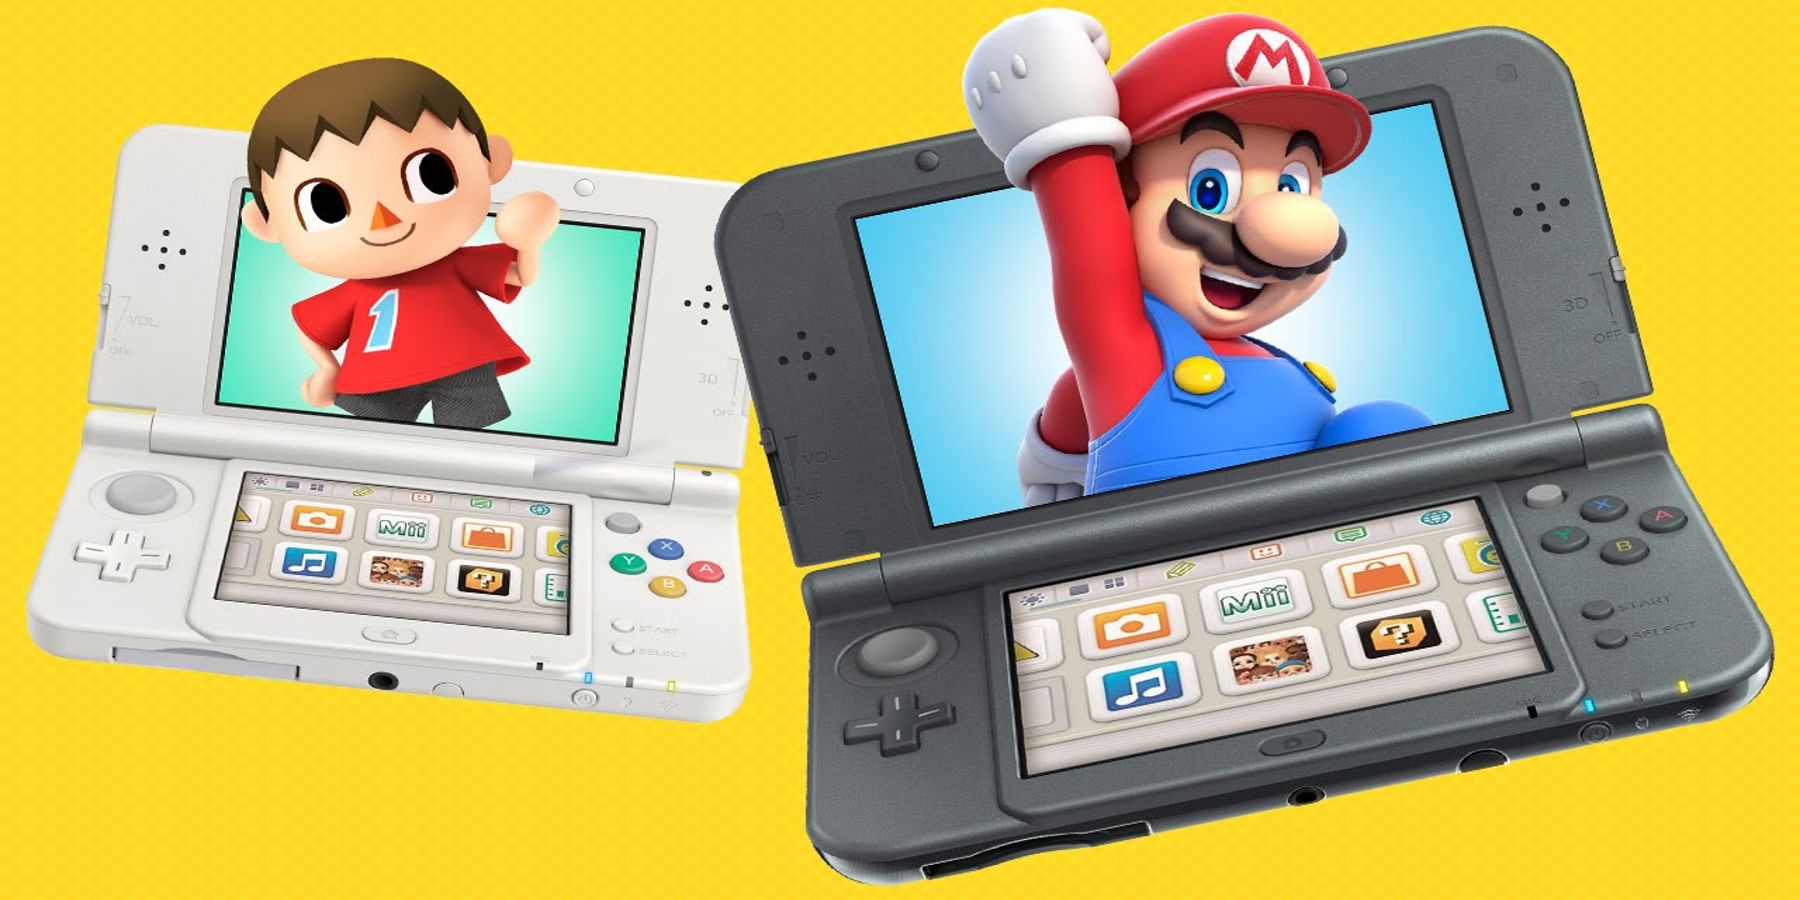 A promotional image of the Nintendo 3DS.